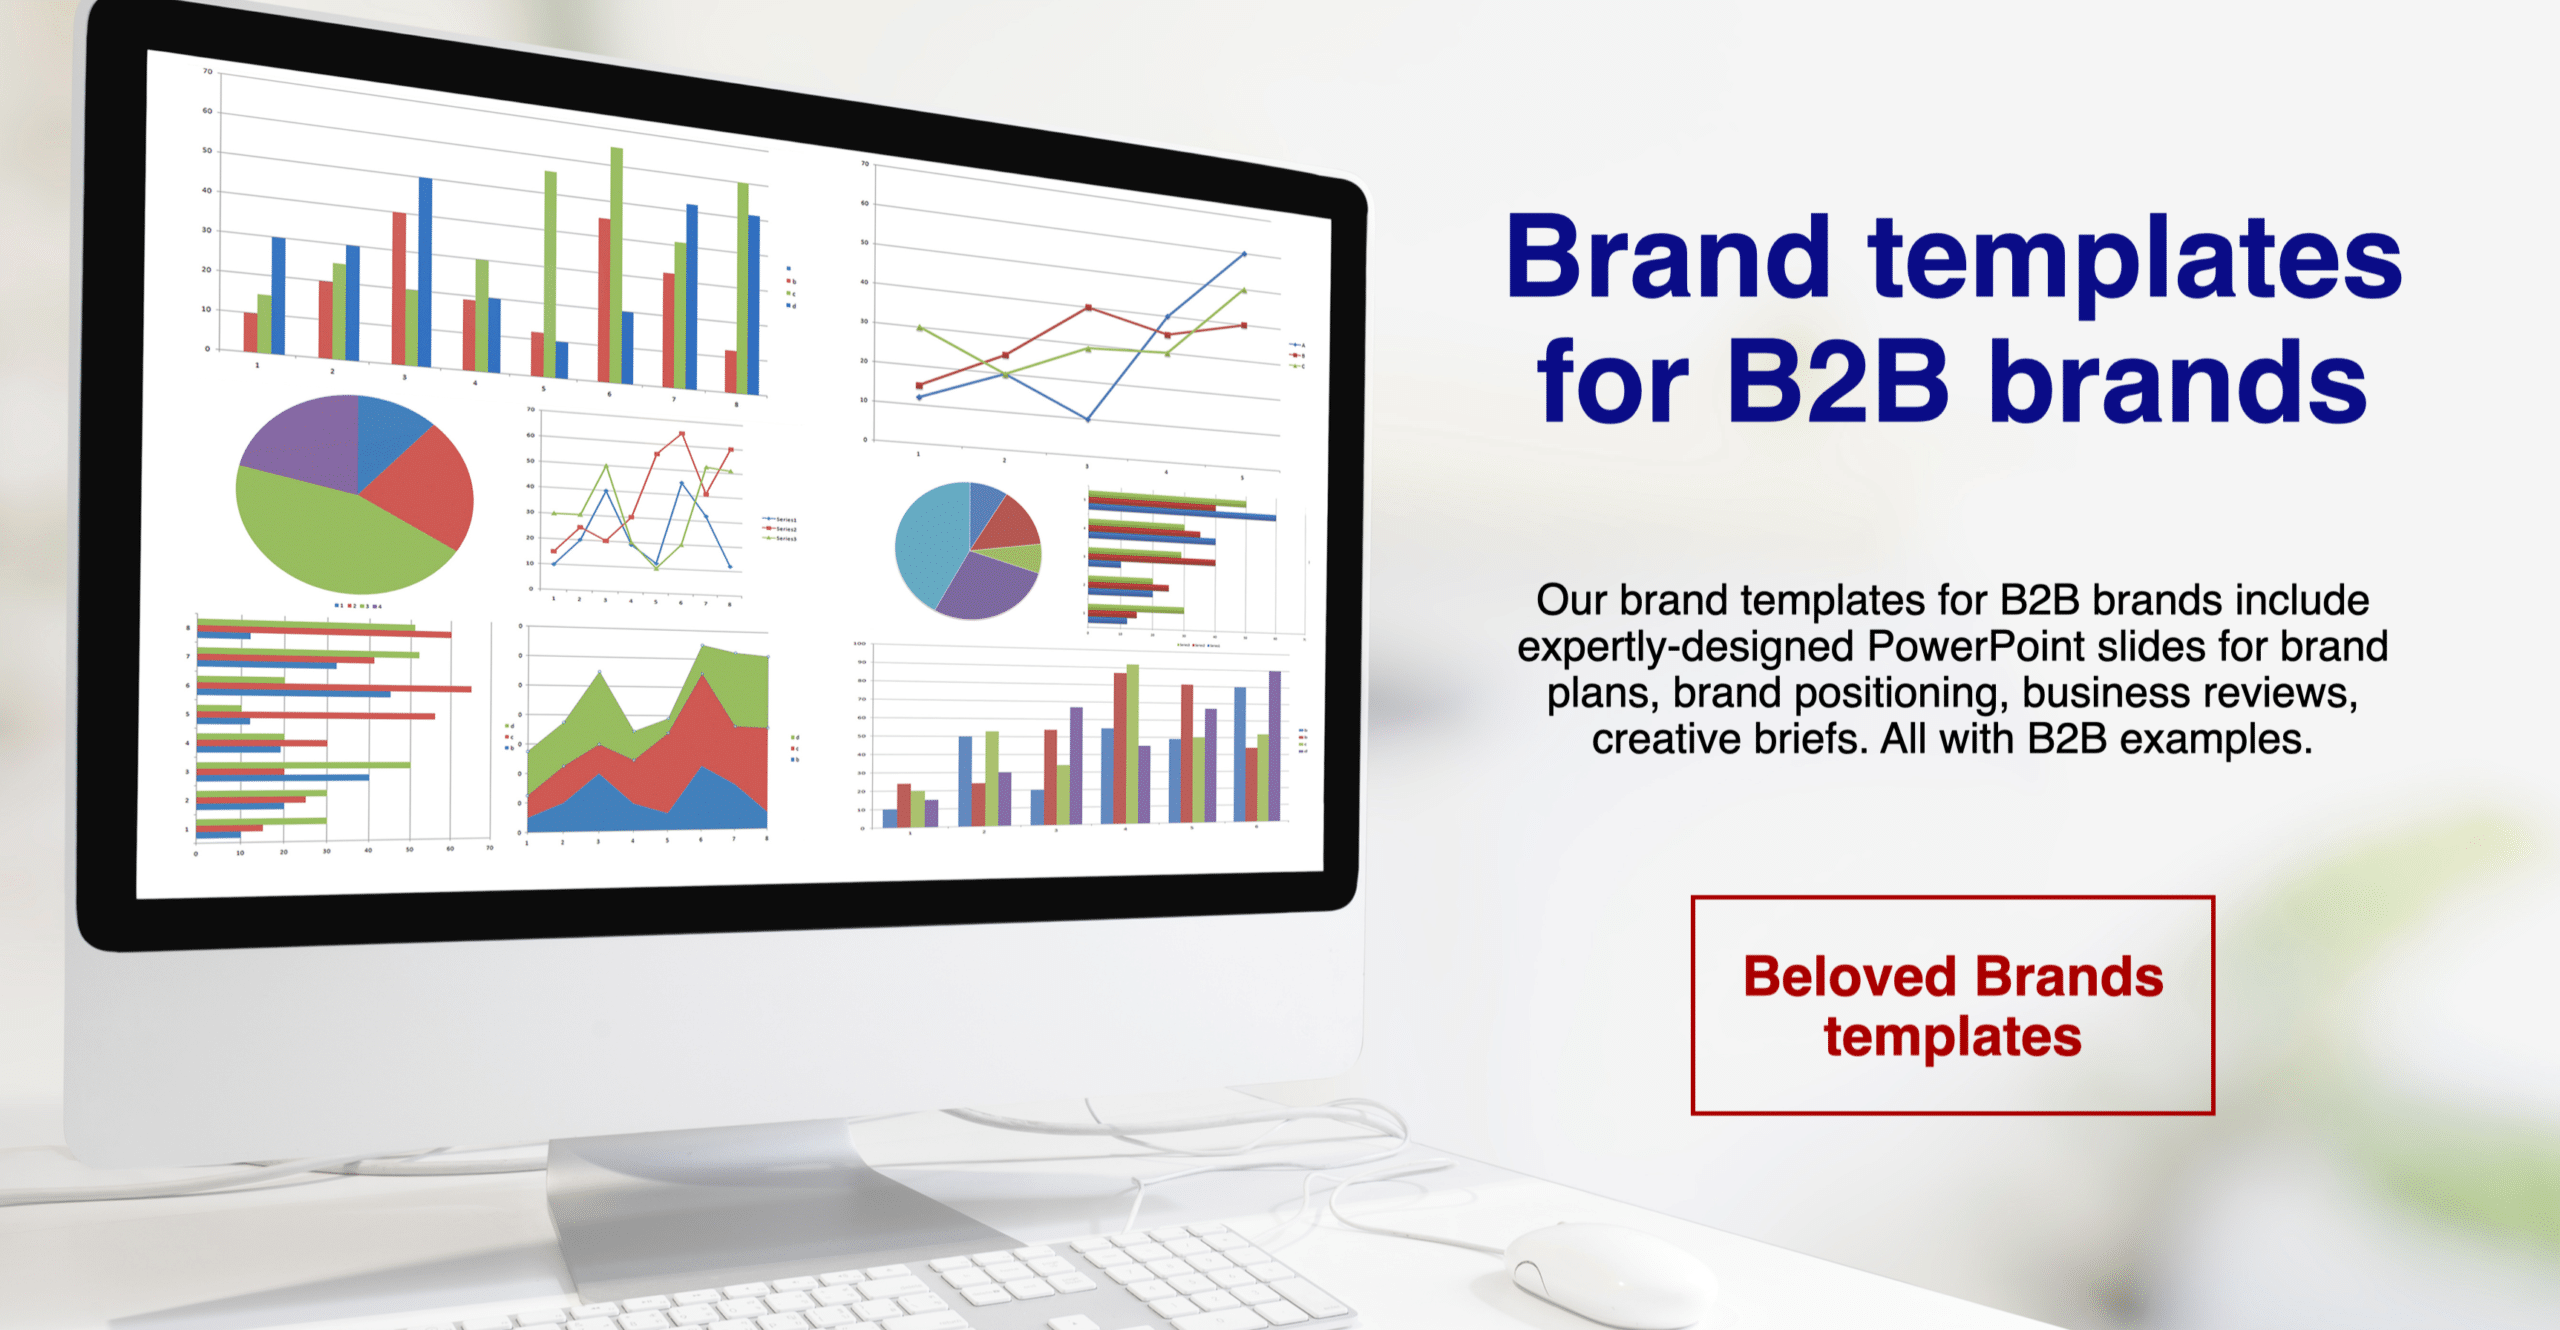 Brand templates for B2B brands